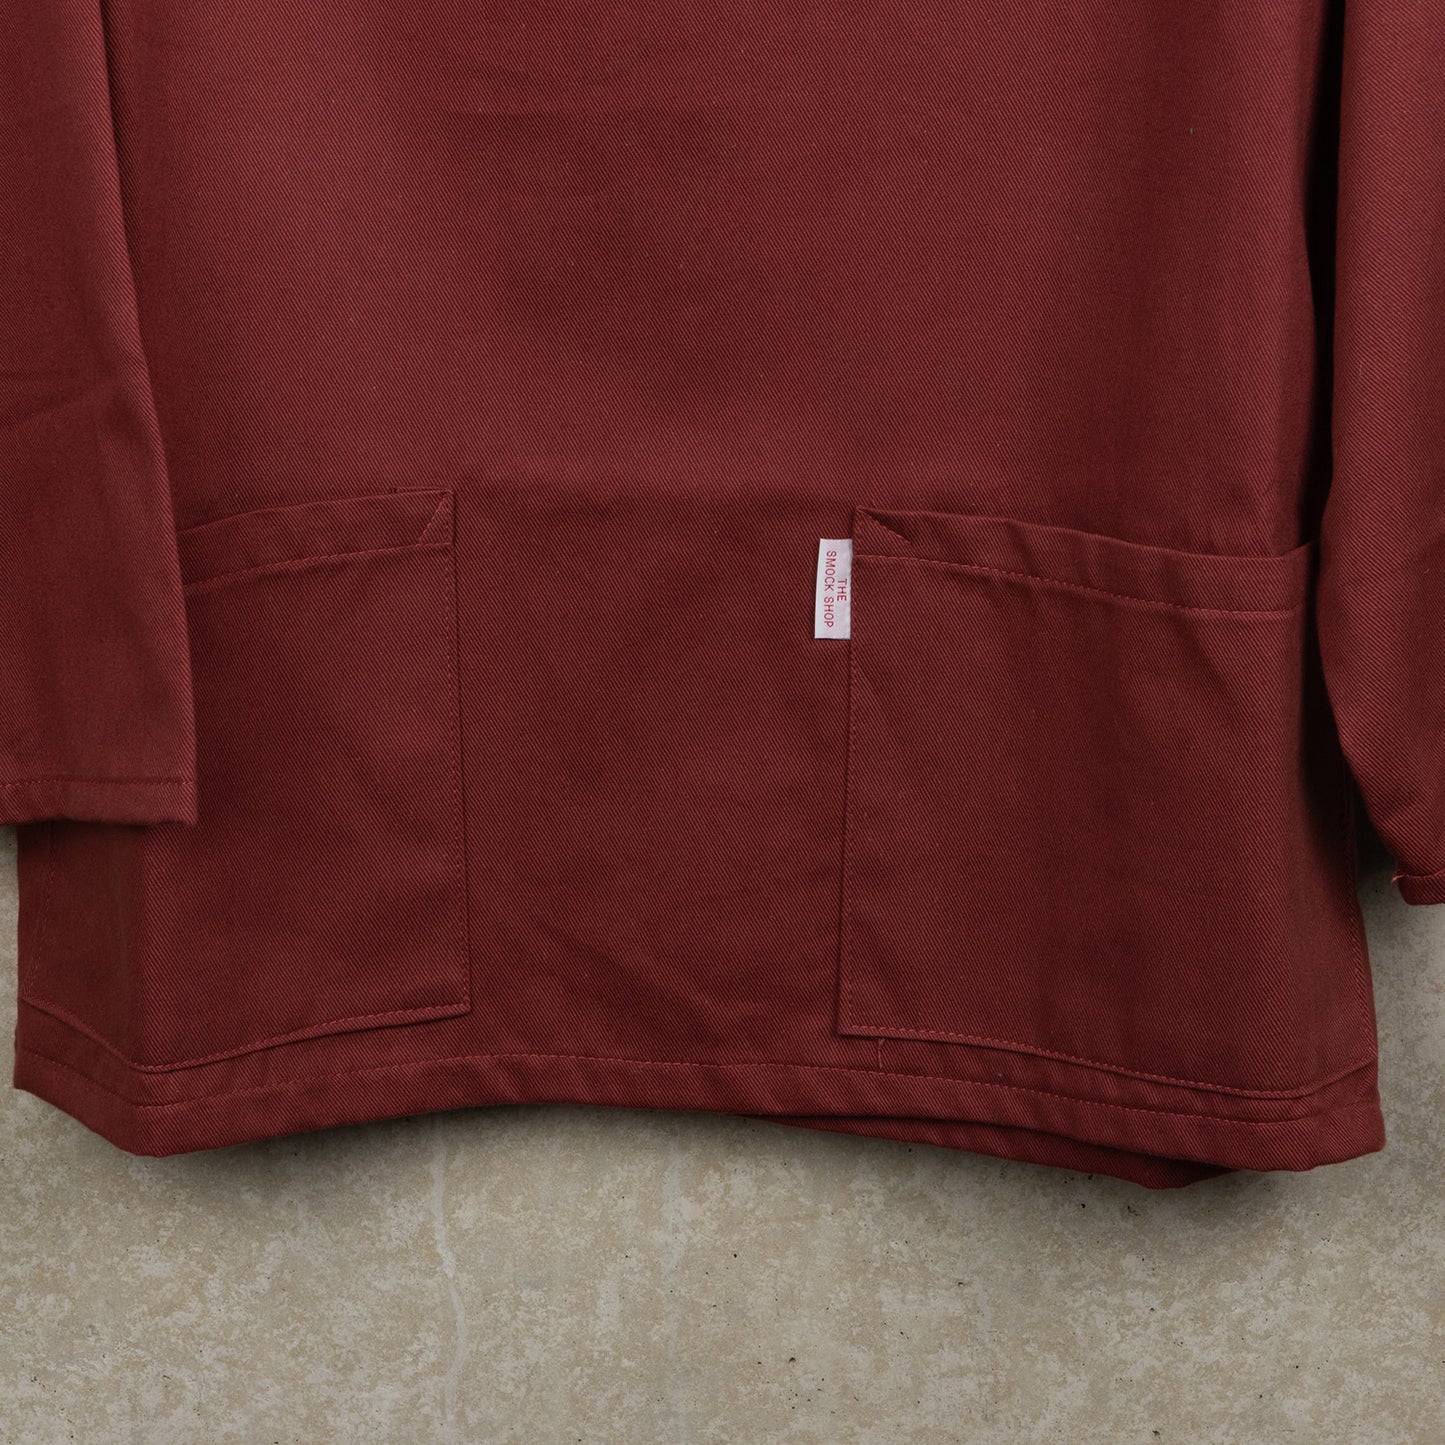 close up of Breton red smocks two front pockets